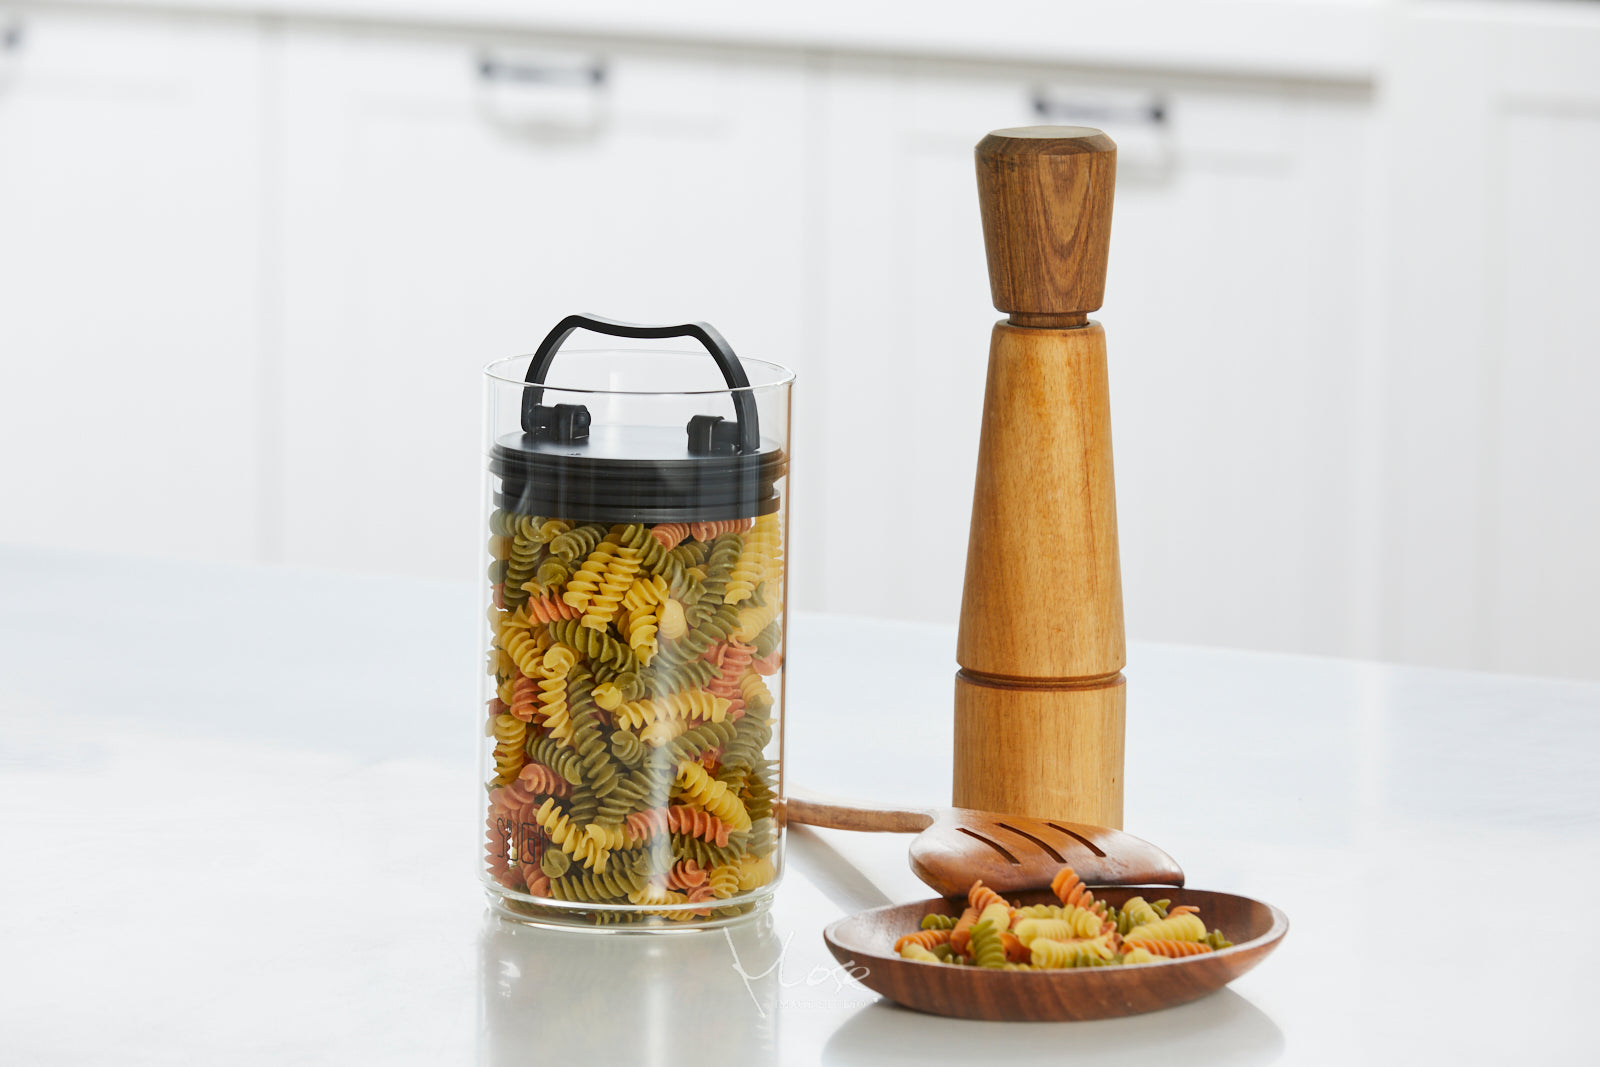 Compression Canisters - THAT! Premium Kitchenware